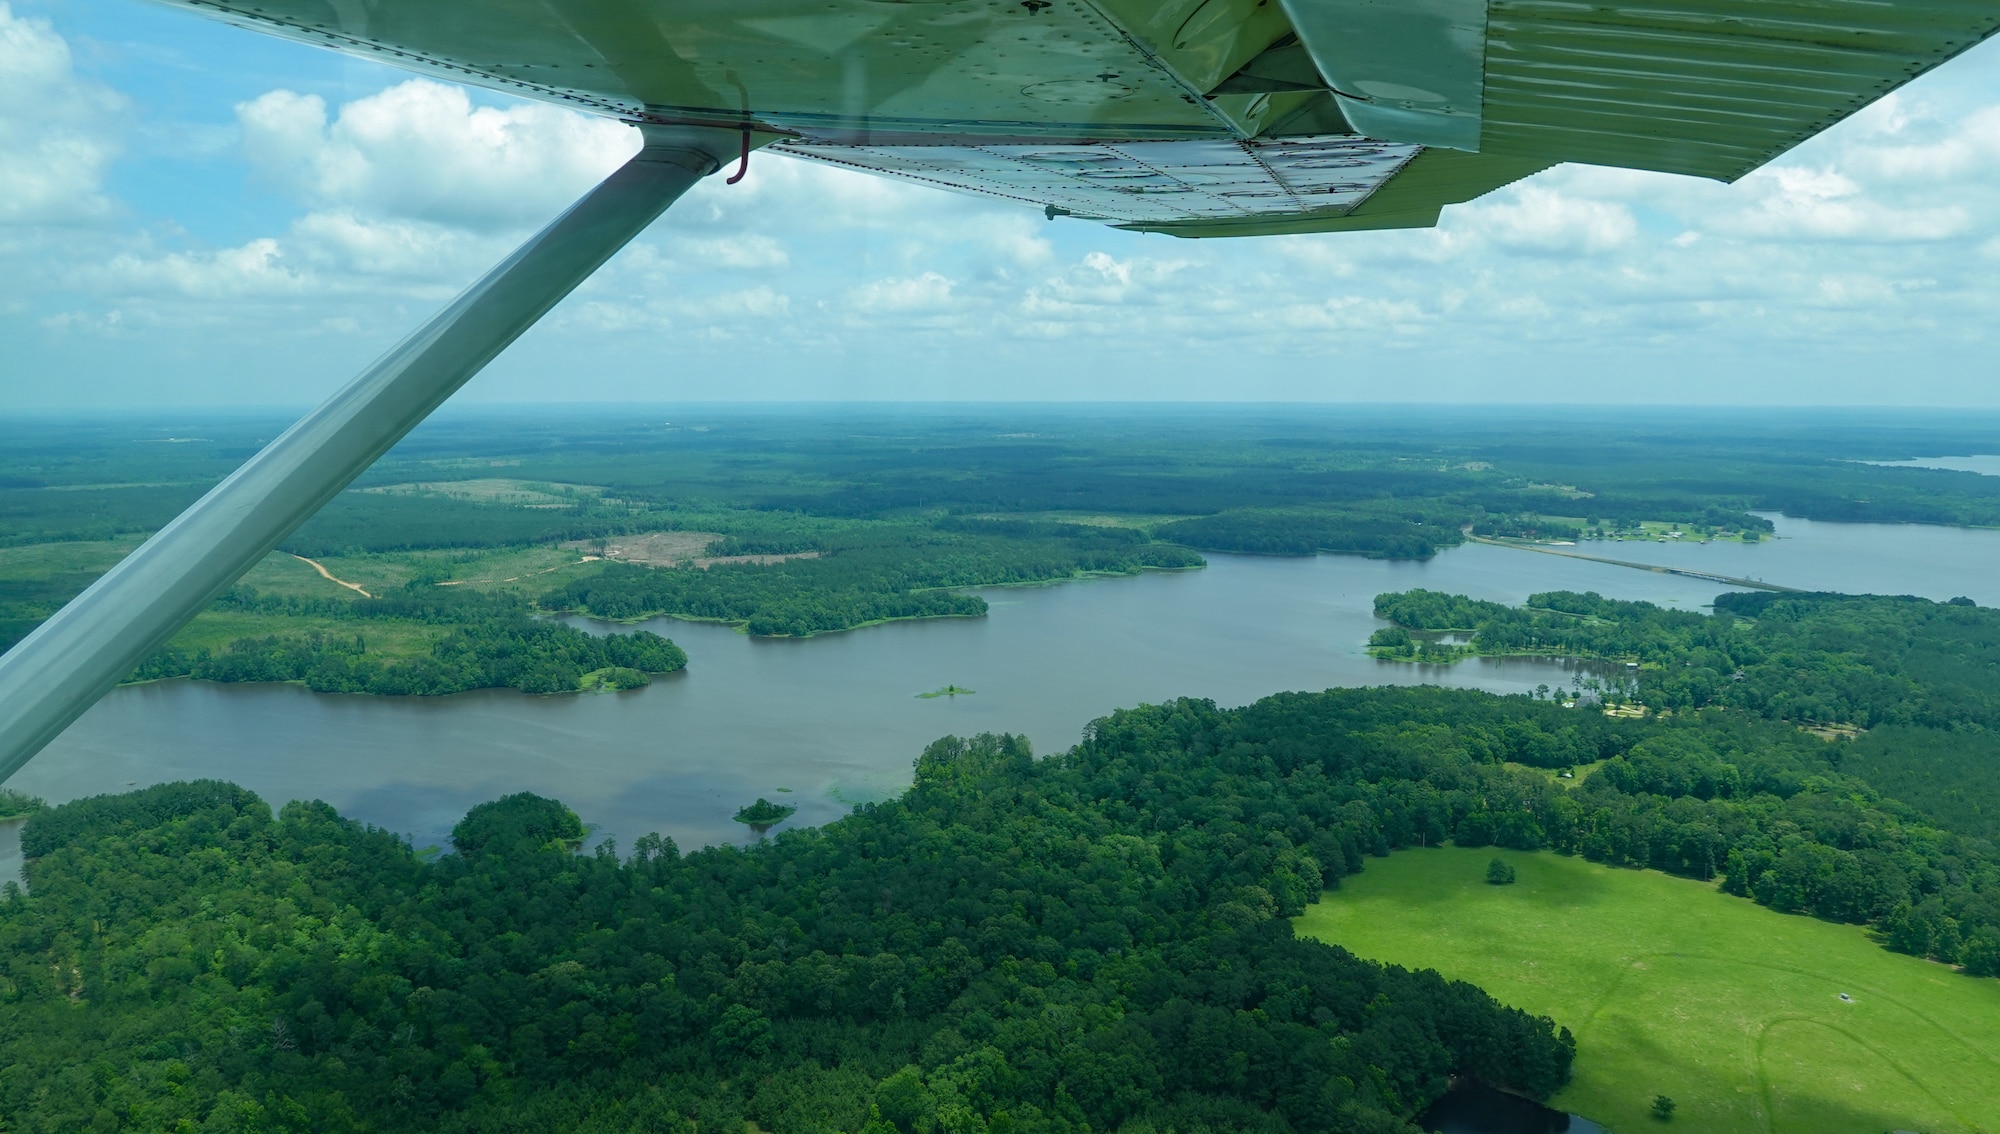 A Civil Air Patrol Cessna 182 Skylane, flies over Lake Bistineau, Louisiana, during a Mid-Air Collision Avoidance safety flight May 28, 2021. MACA visits are conducted at various airports within a 50 nautical mile radius of Barksdale in which the CAP is tasked to move military personnel to help support Air Force mission safety requirements in different locations. (Courtesy photo by Master Sgt. Steven Vance Jr.)